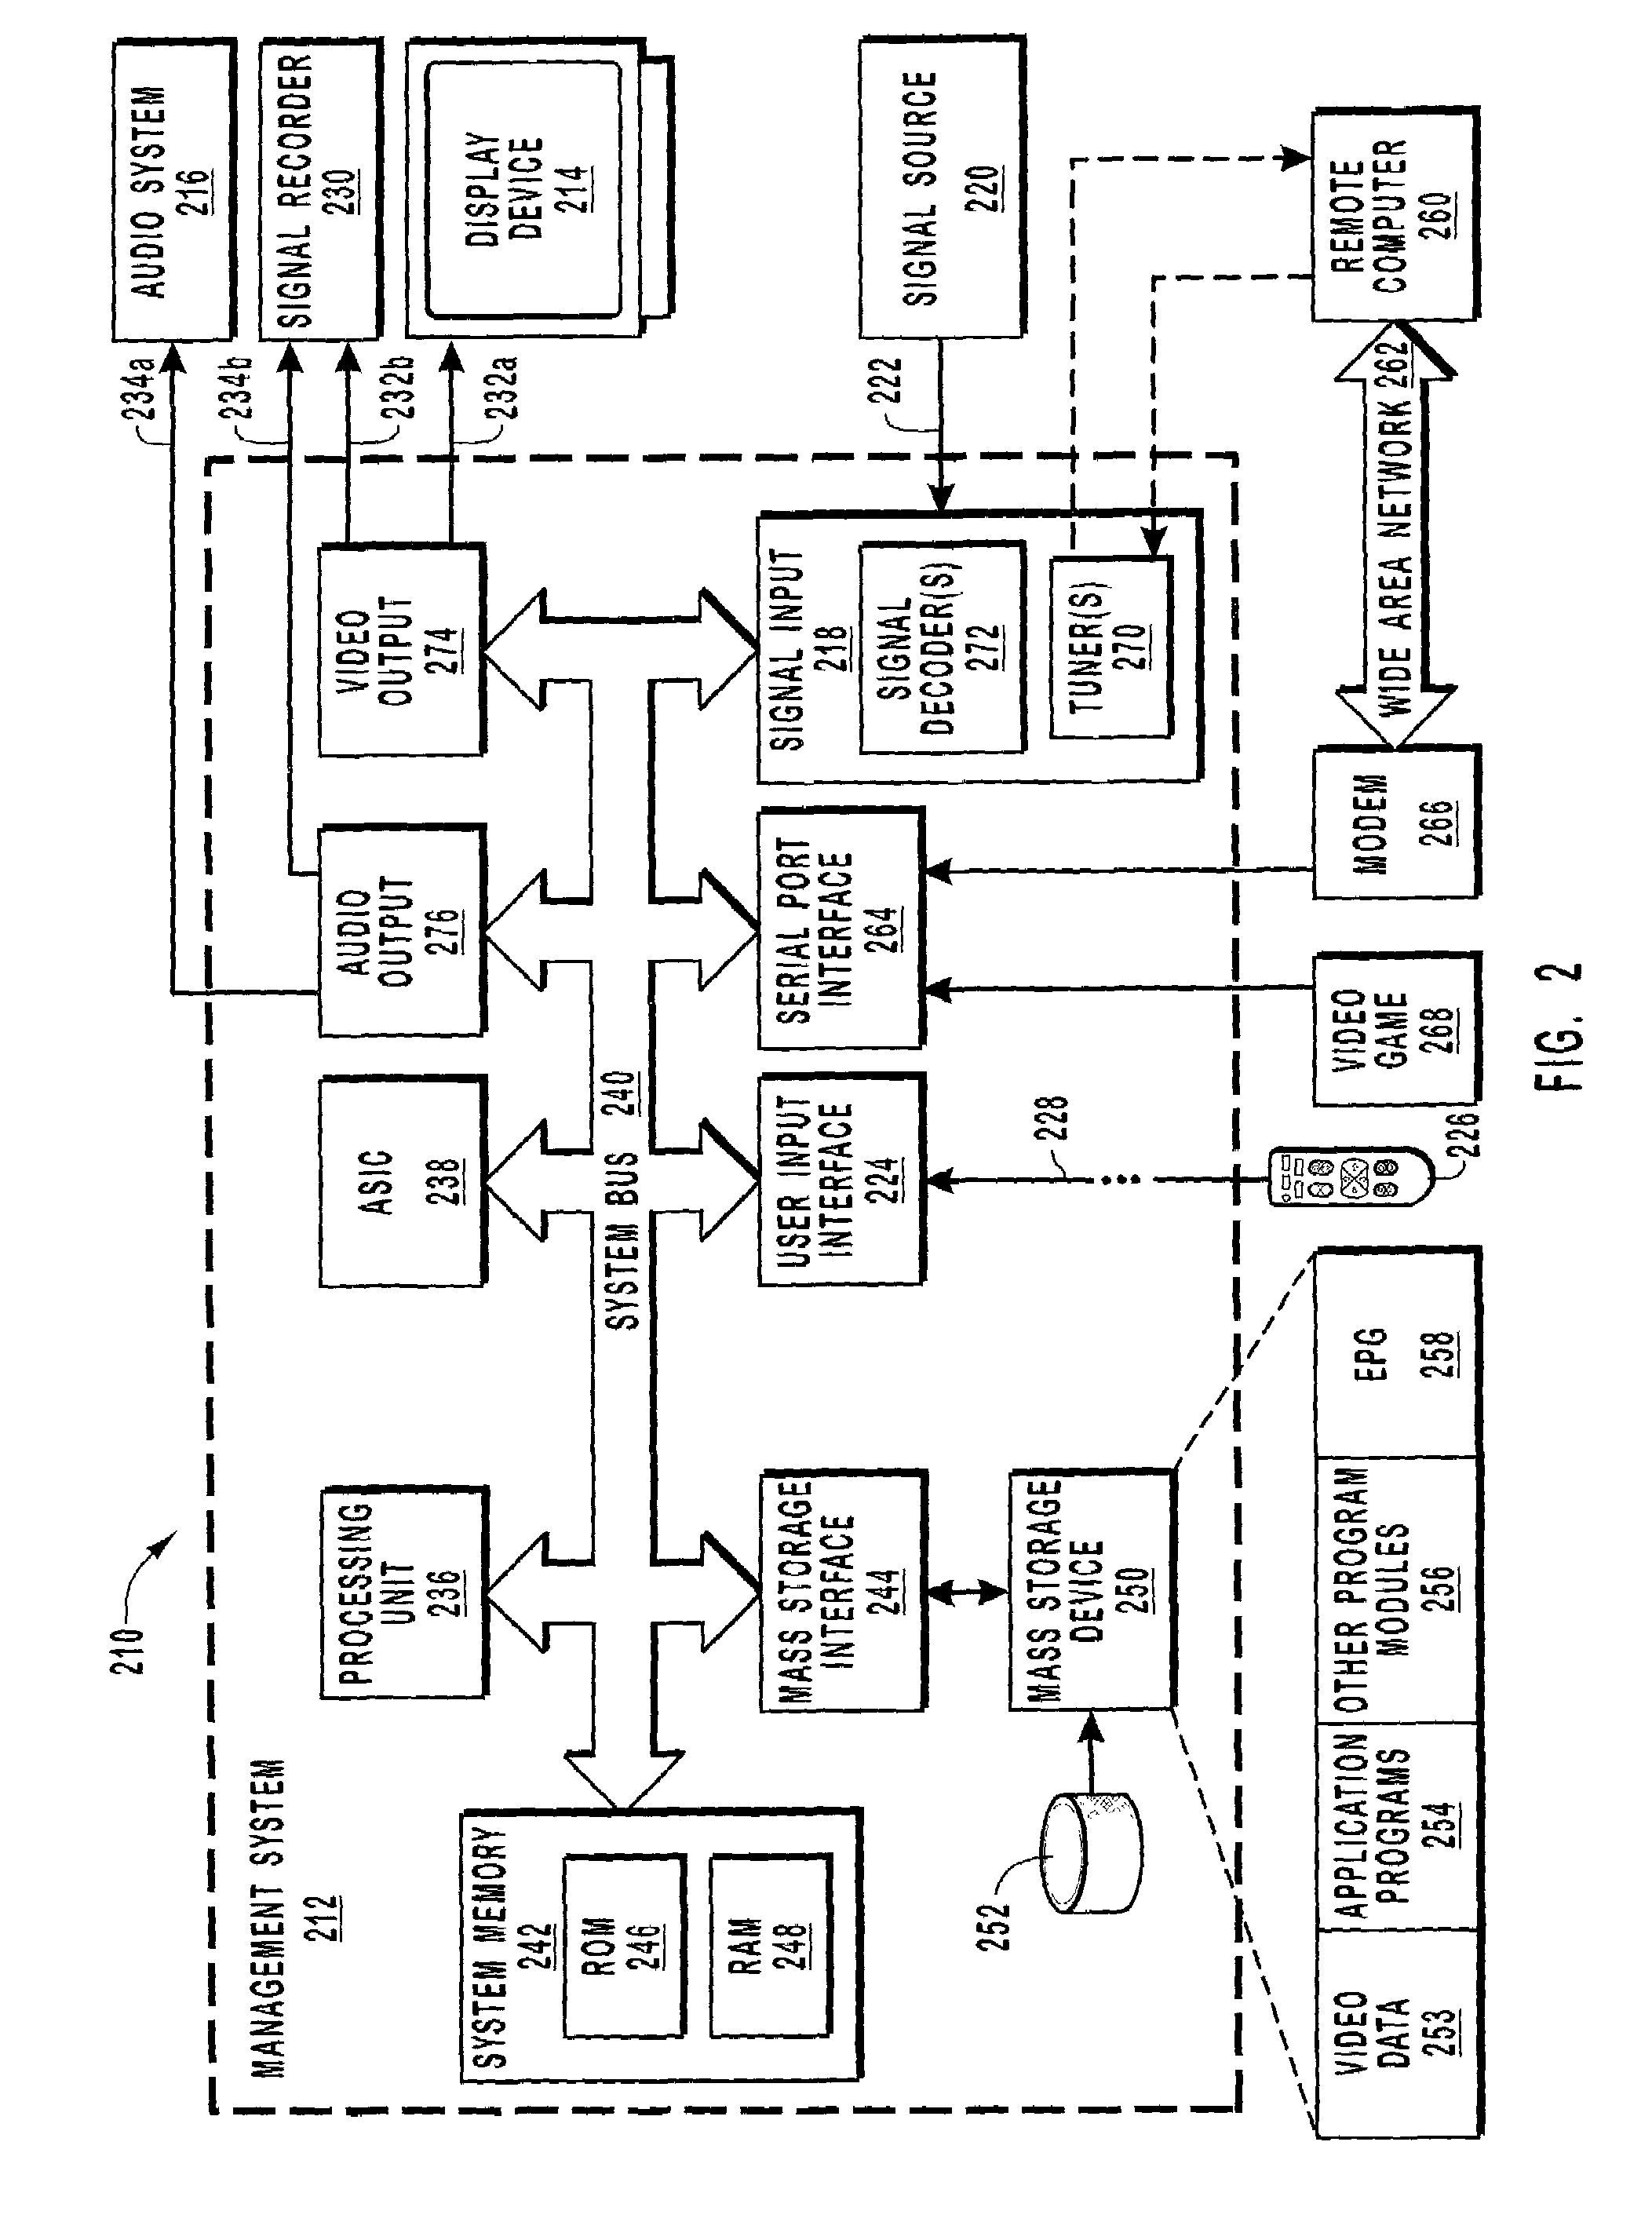 Methods and systems for distributing multimedia data over heterogeneous networks